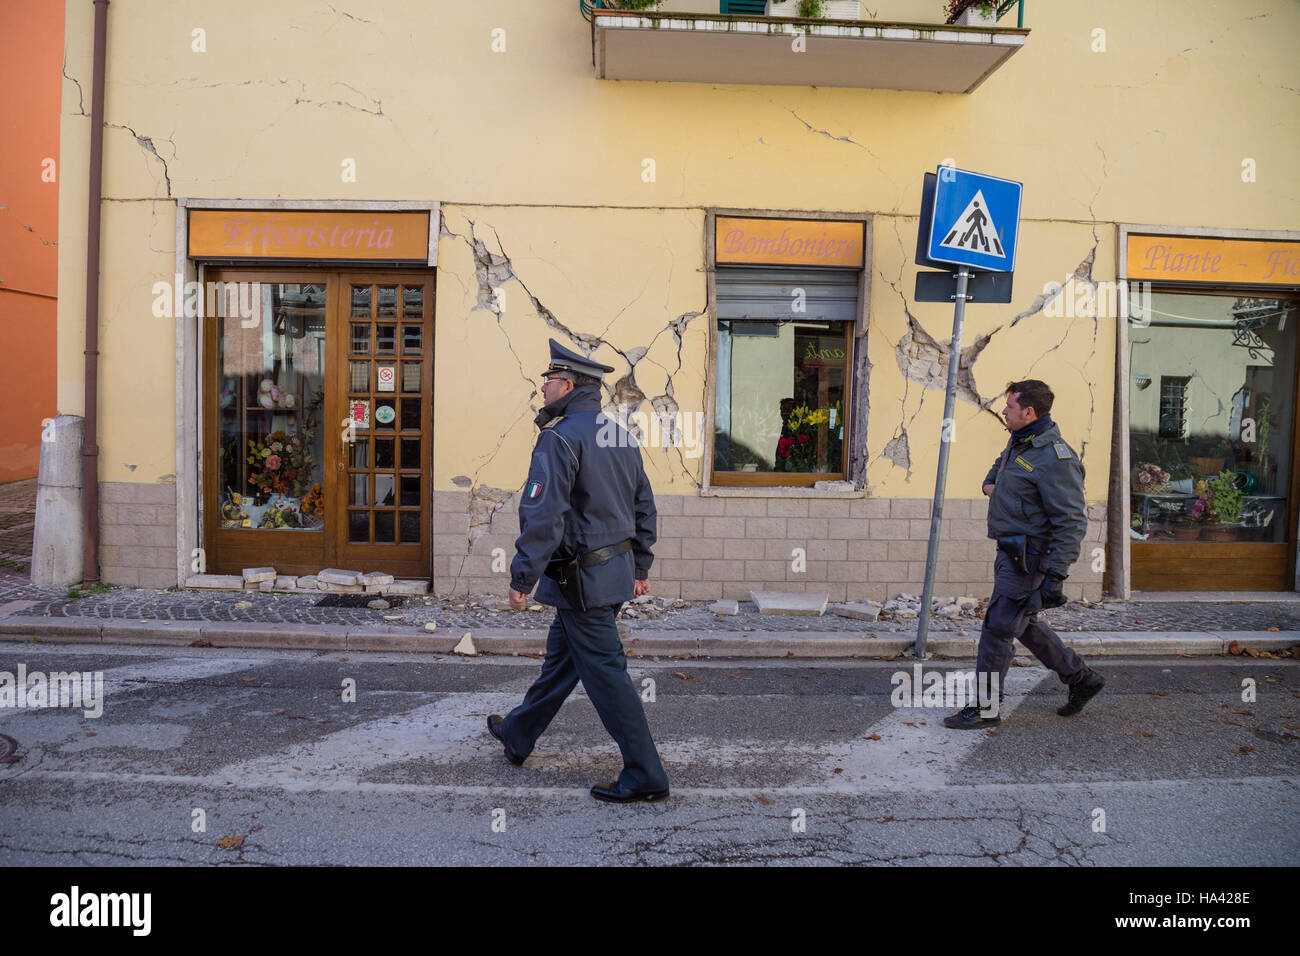 Aftermath of the earthquake in the town of Valnerina, Italy. Twin earthquakes rocked central Italy on Wednesday. The second quake was registered at a magnitude of 6.0 on the Richter scale and occurred in the same region struck in August by a devastating t Stock Photo